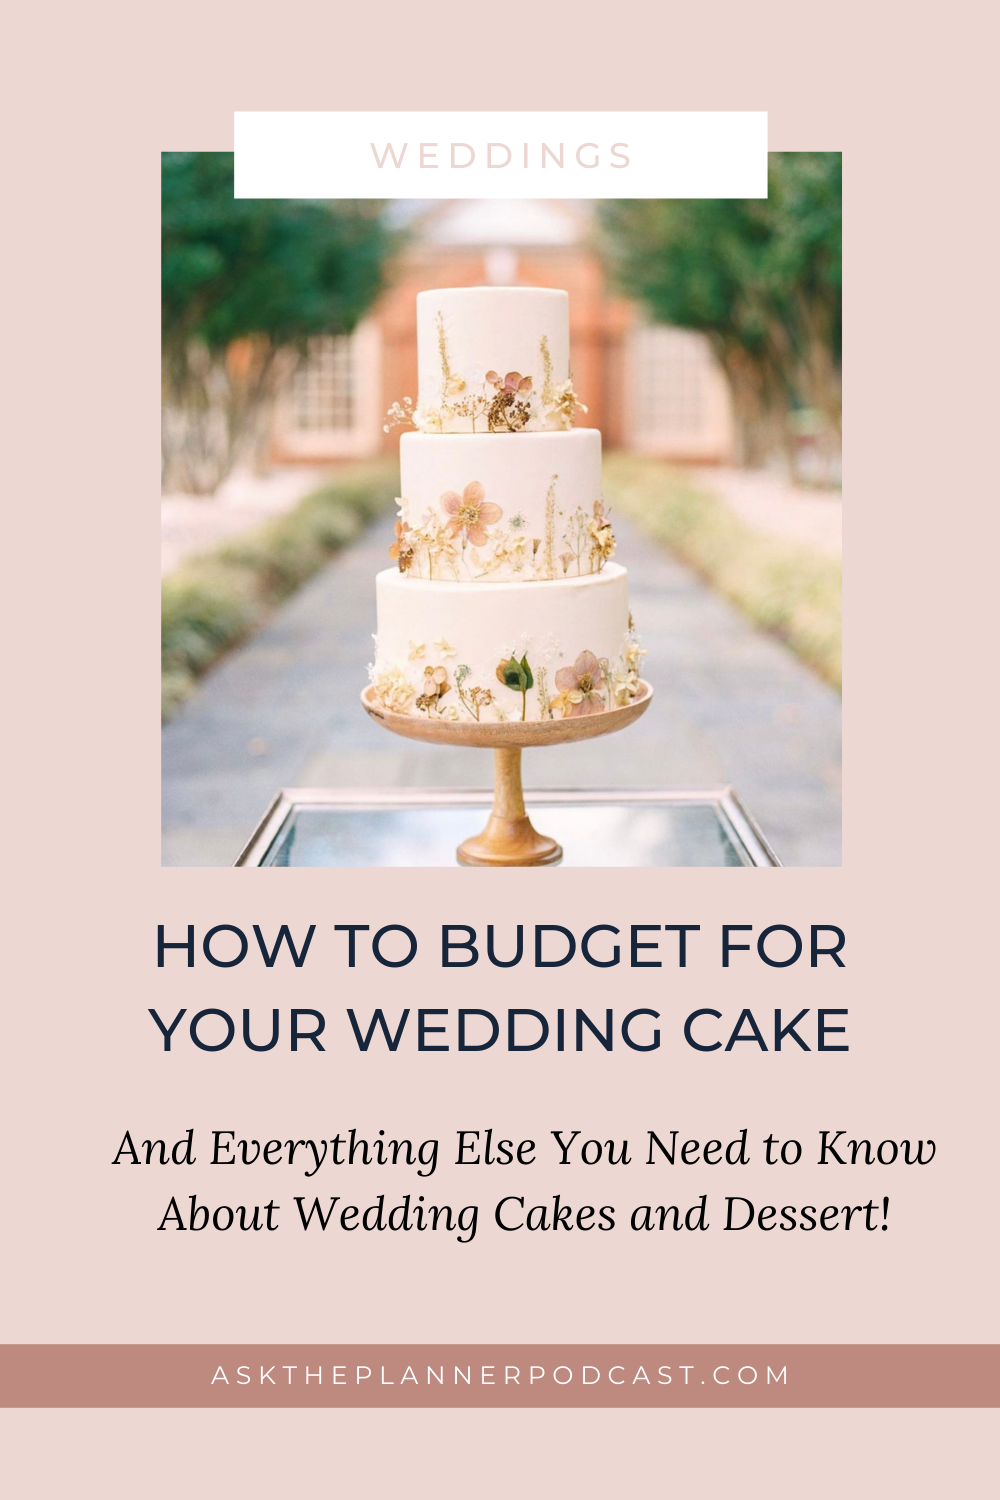 How to budget for your wedding cake